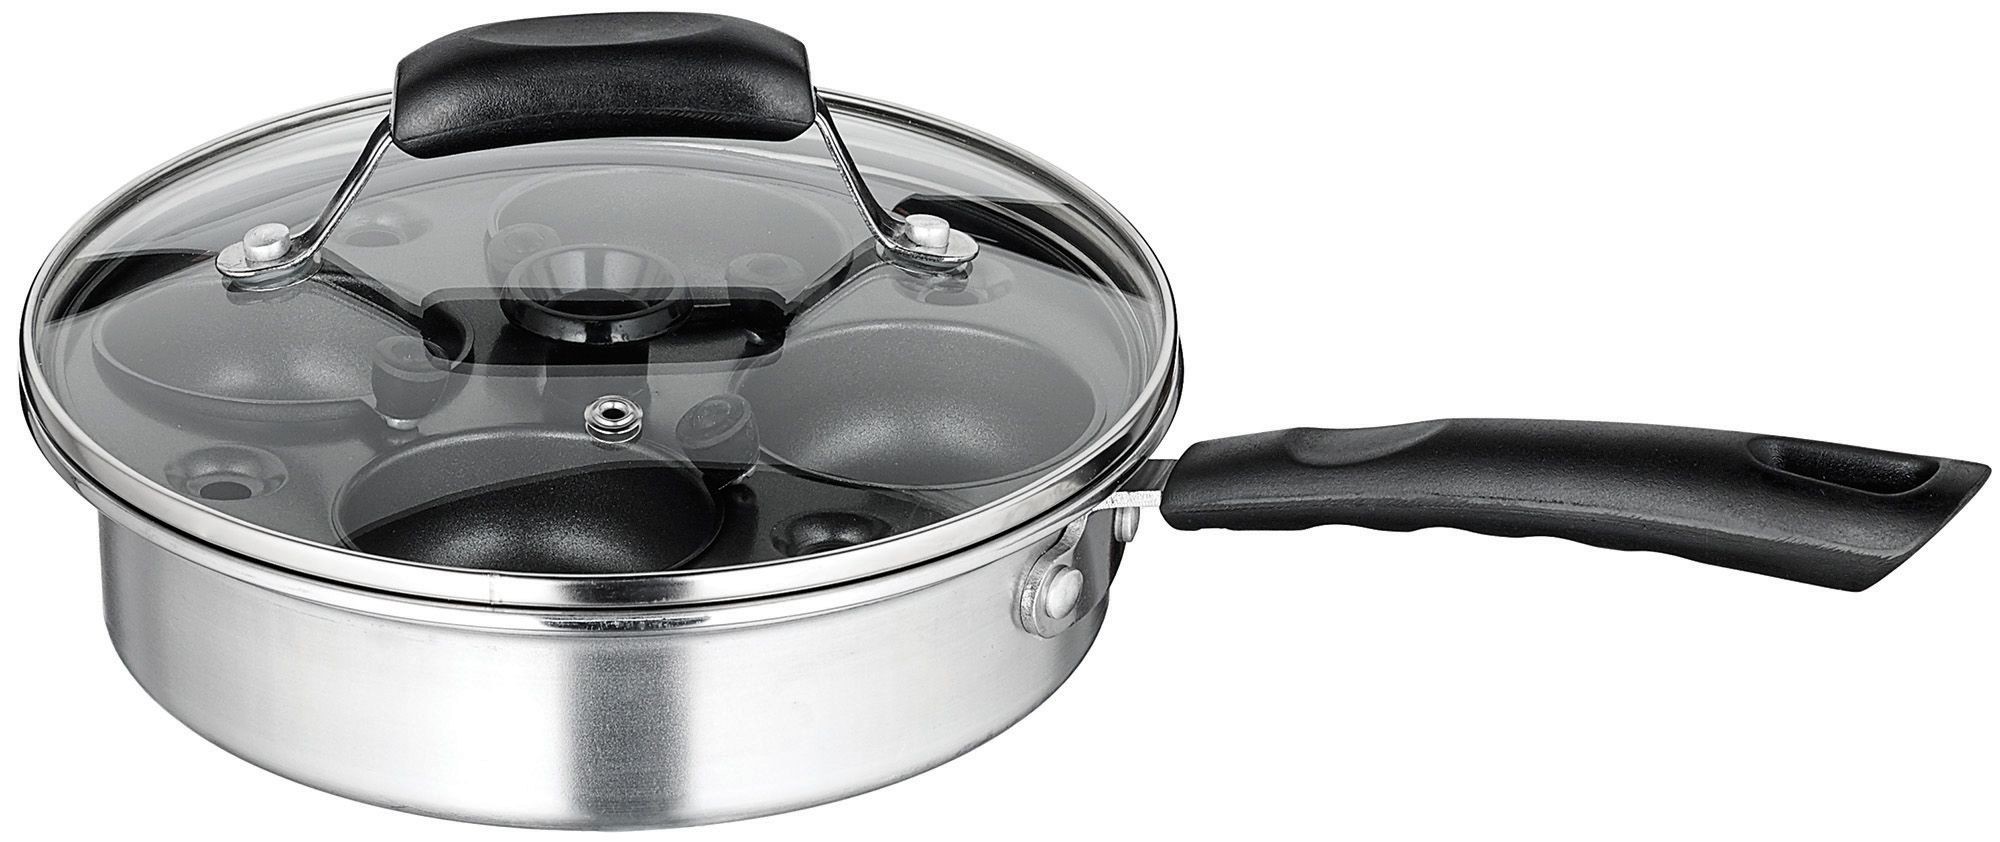 Winco CEP-4 4-Egg Nonstick Poacher With Glass Lid